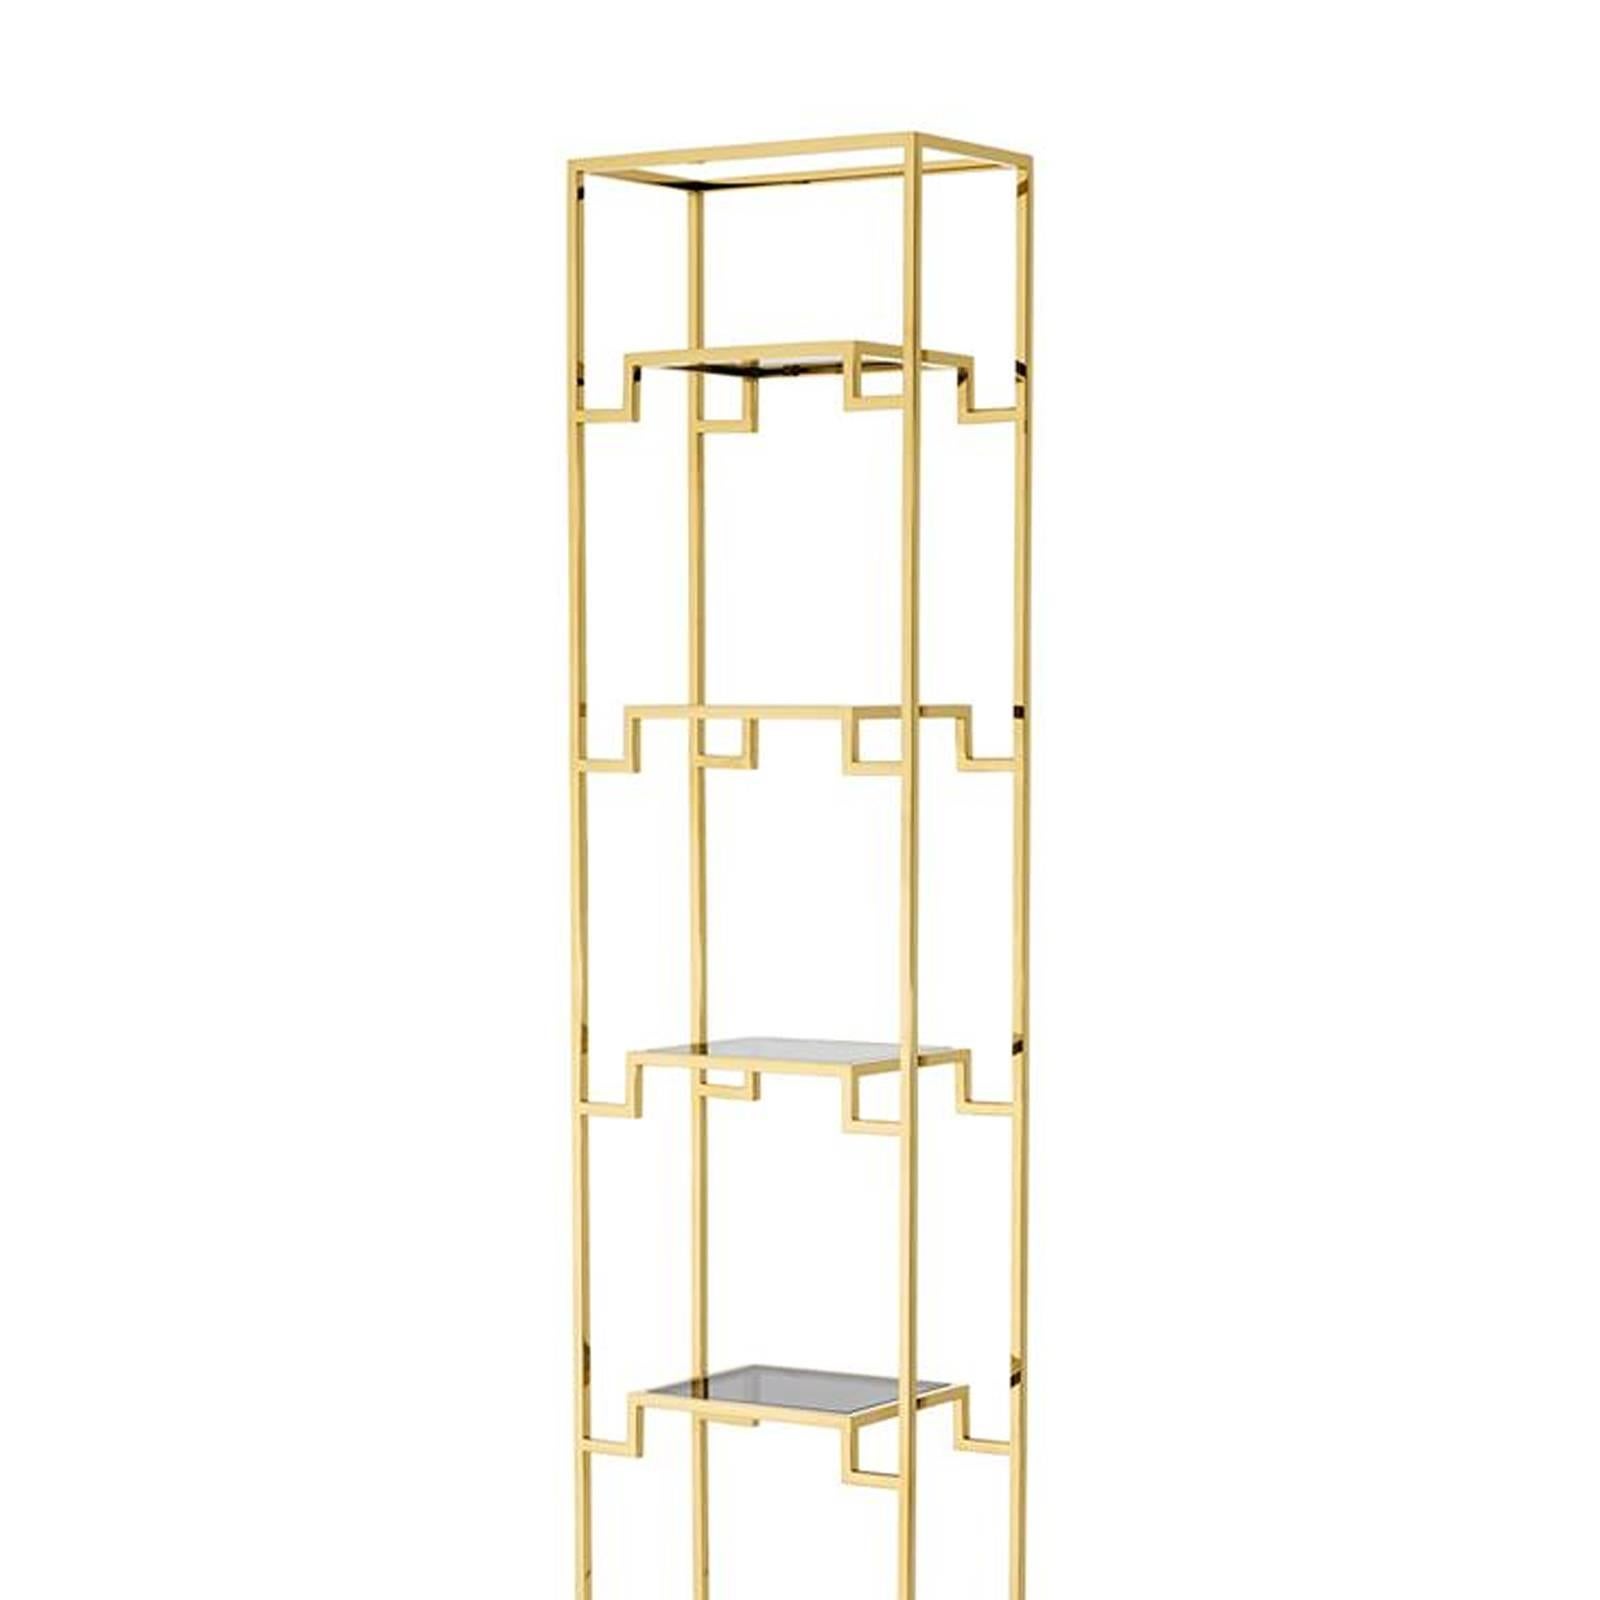 Bookshelves Stantord medium with structure in gold 
finish. With six shelves in smoked black tempered glass.
Also available in bookshelves stantord large.
